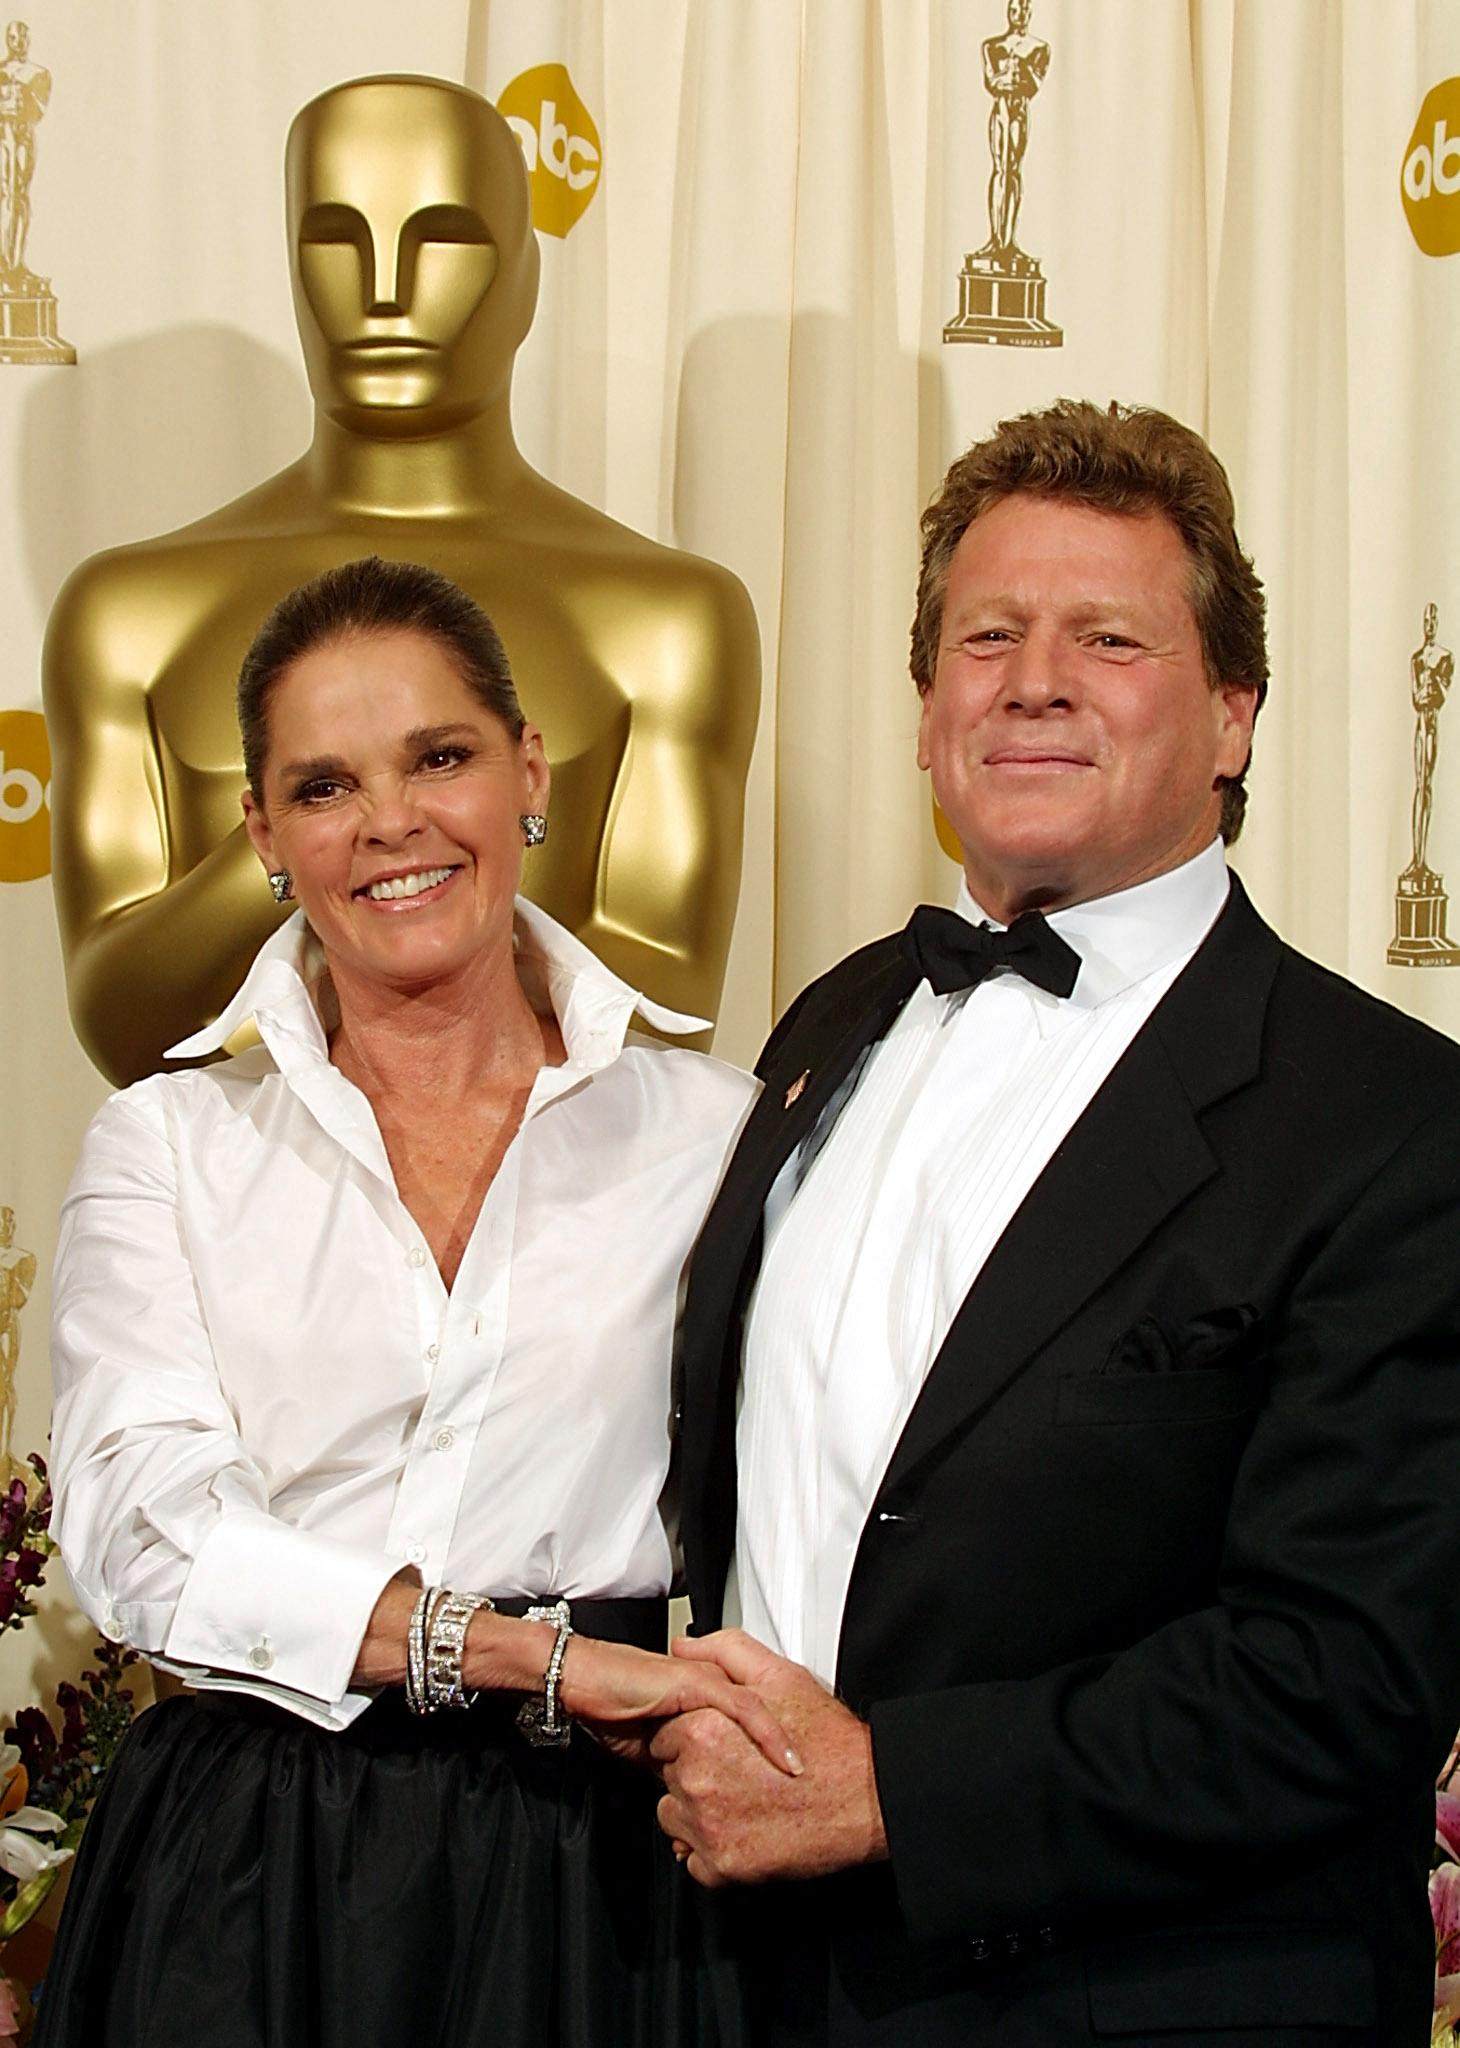 Ryan O’Neal, right, and Ali MacGraw,, stars of the 1970 film Love Story, at the Oscars in 2002. O’Neal died on Friday. Photo: AFP